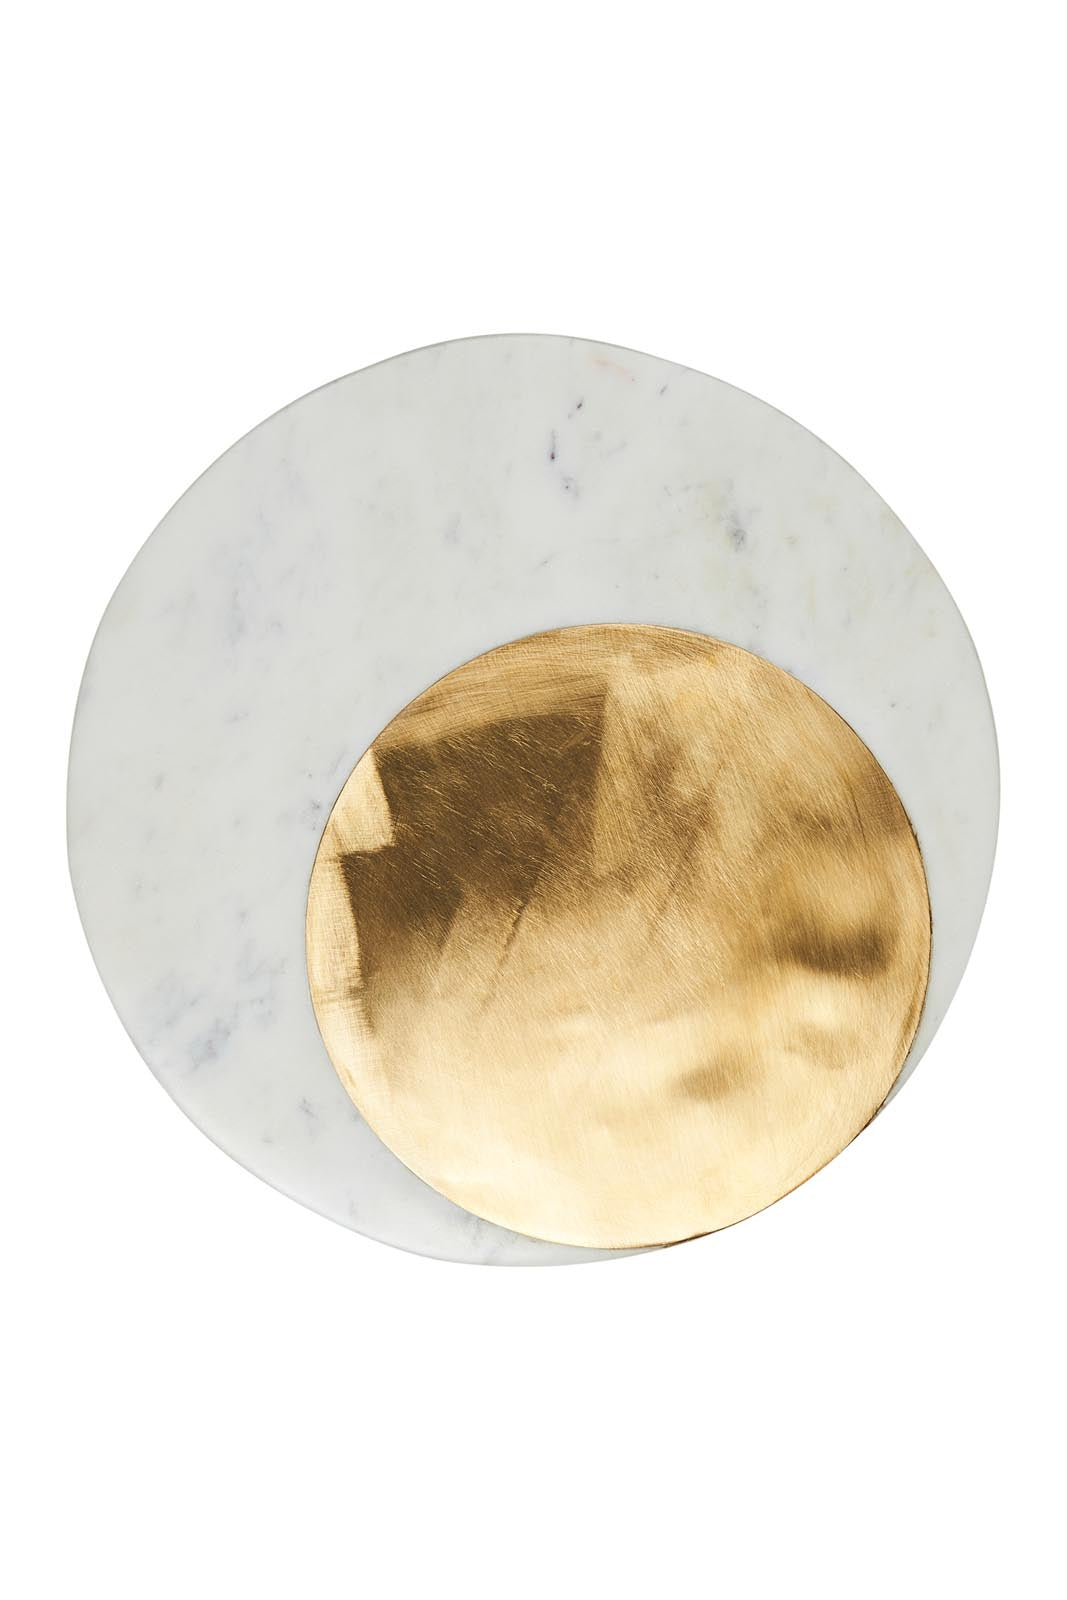 Casa Blanca Round Board - Gold/Marble - eb&ive Table Top